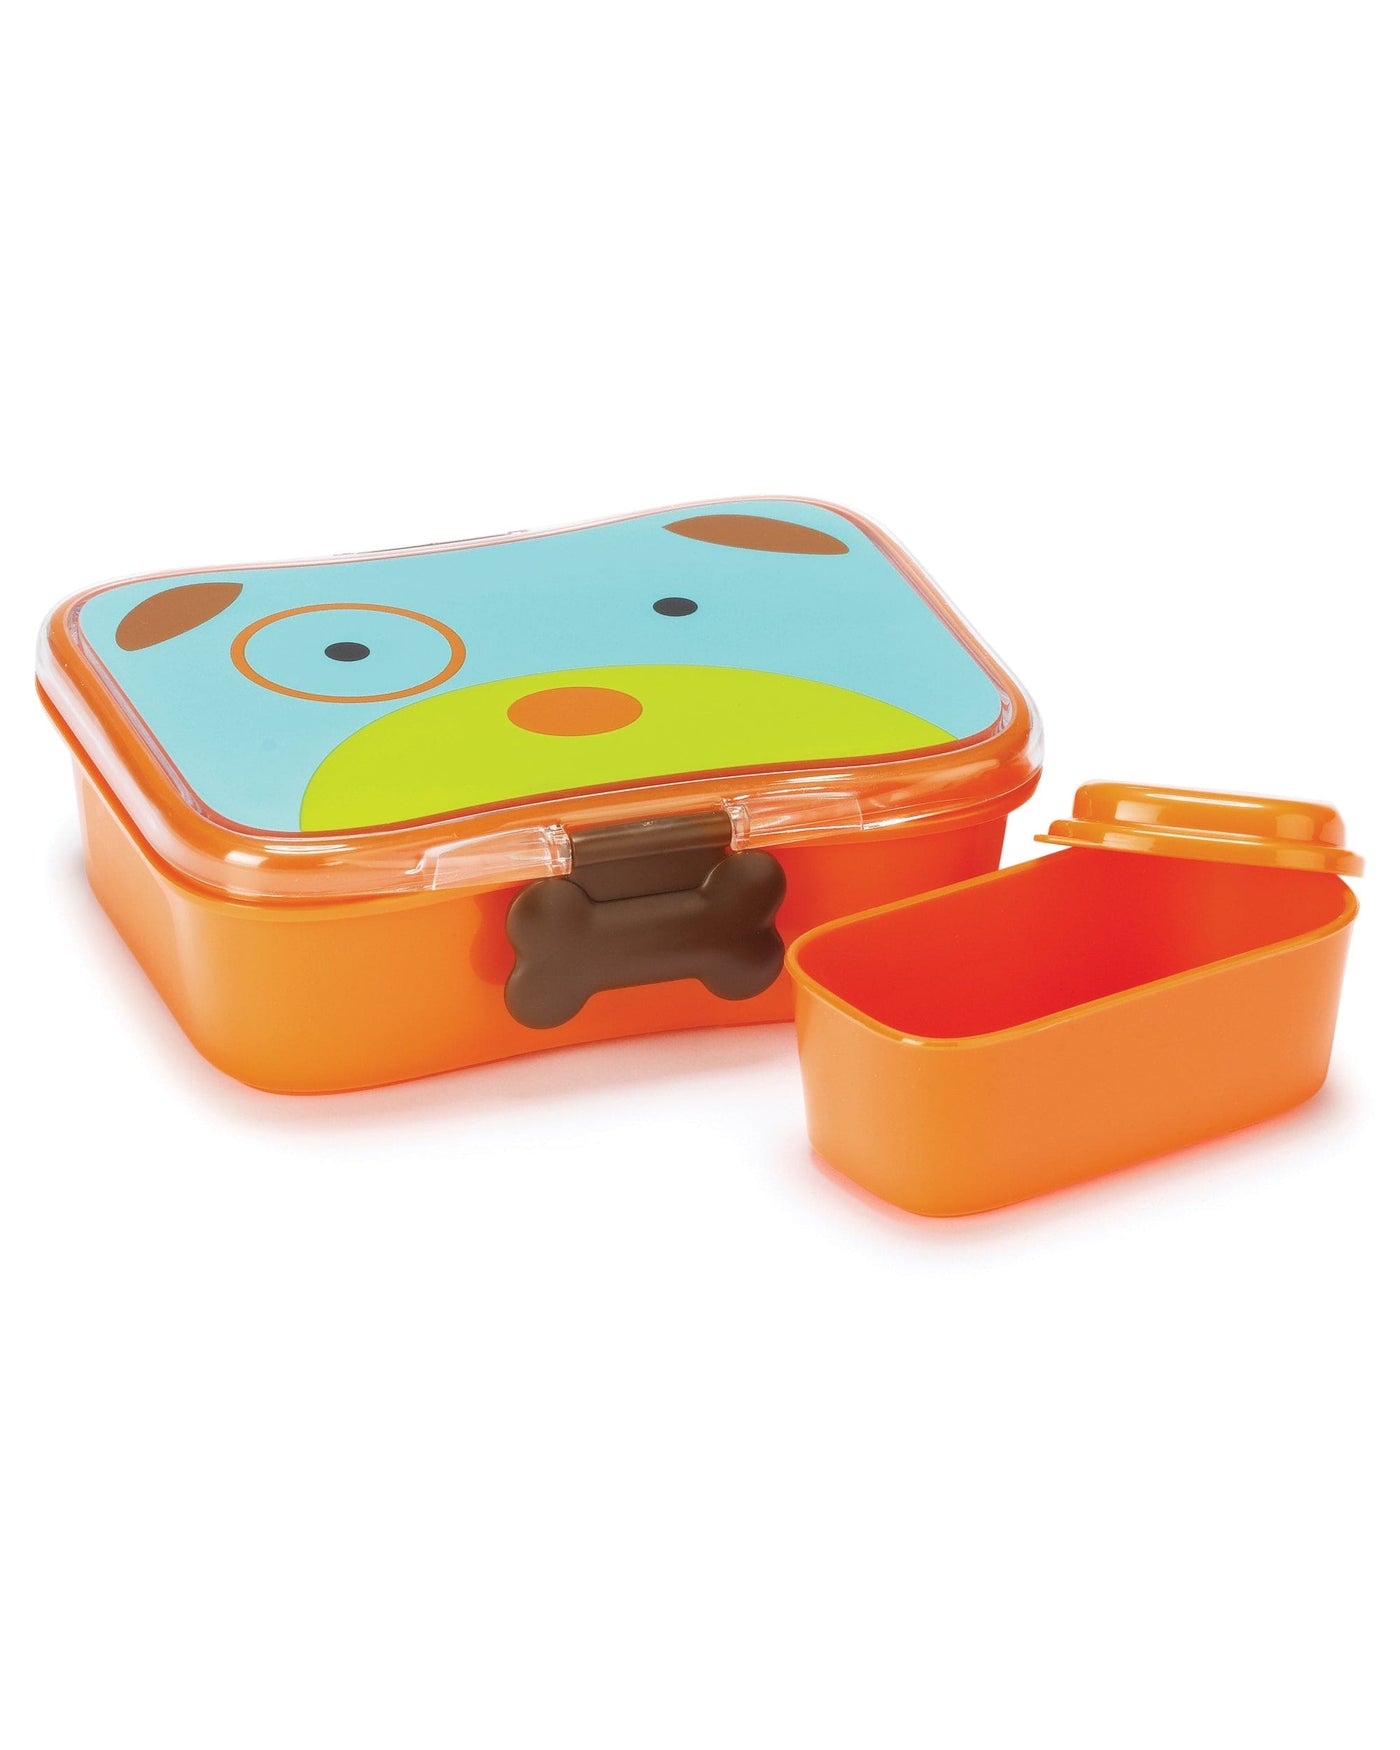 Zoo Lunch Kit - Darby Dog | Skip Hop by Skip Hop, USA Baby Care